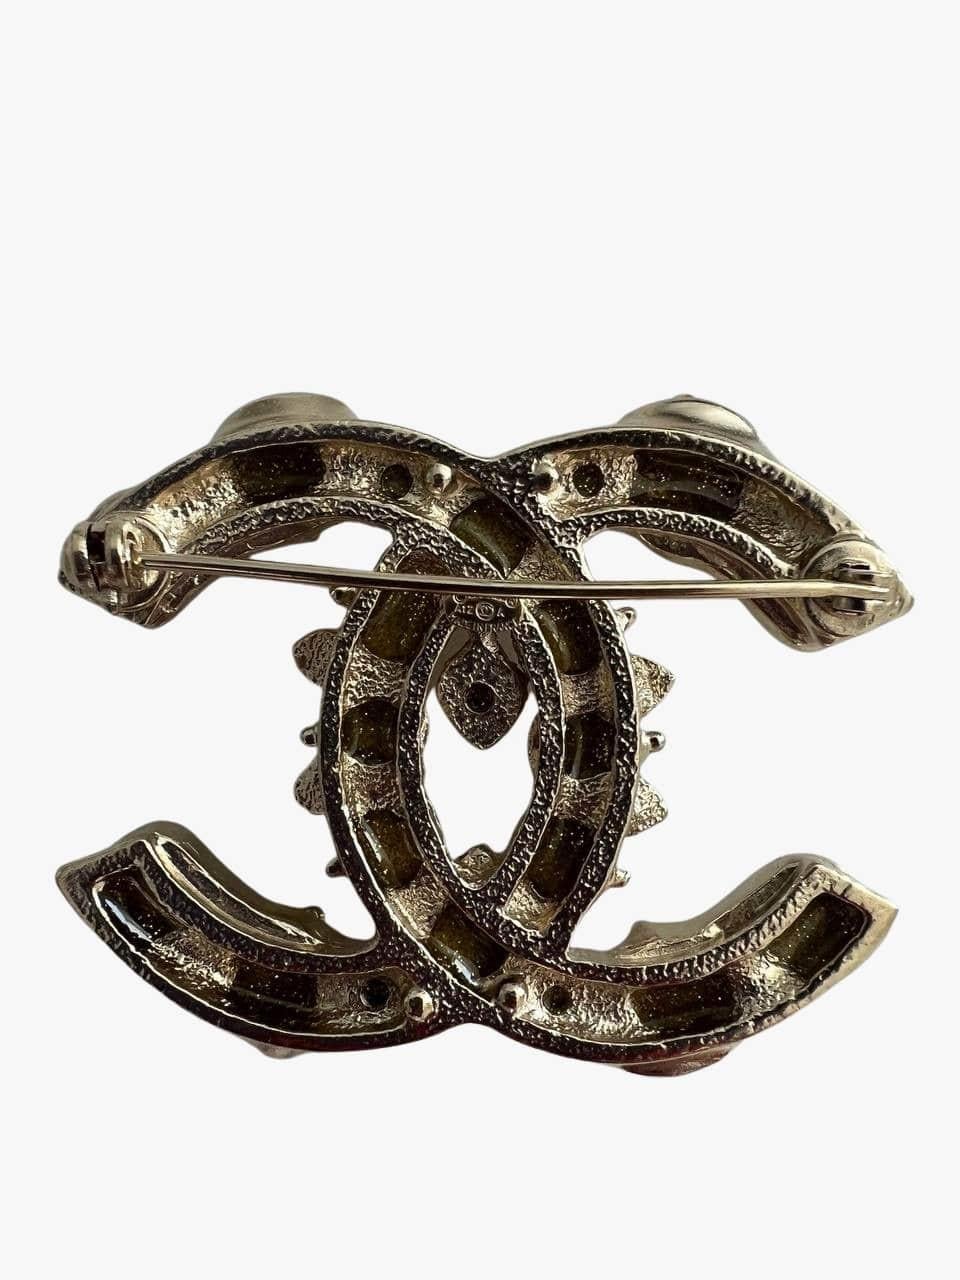 Chanel brooch in the iconic form of interlocking CC logo. 
Decorated with resin cabochons in silver and yellow-tone colors.
Signed. 
Mark: A12 A  
Year: 2012
Condition: very good, light scratches throughout metal.
........Additional information